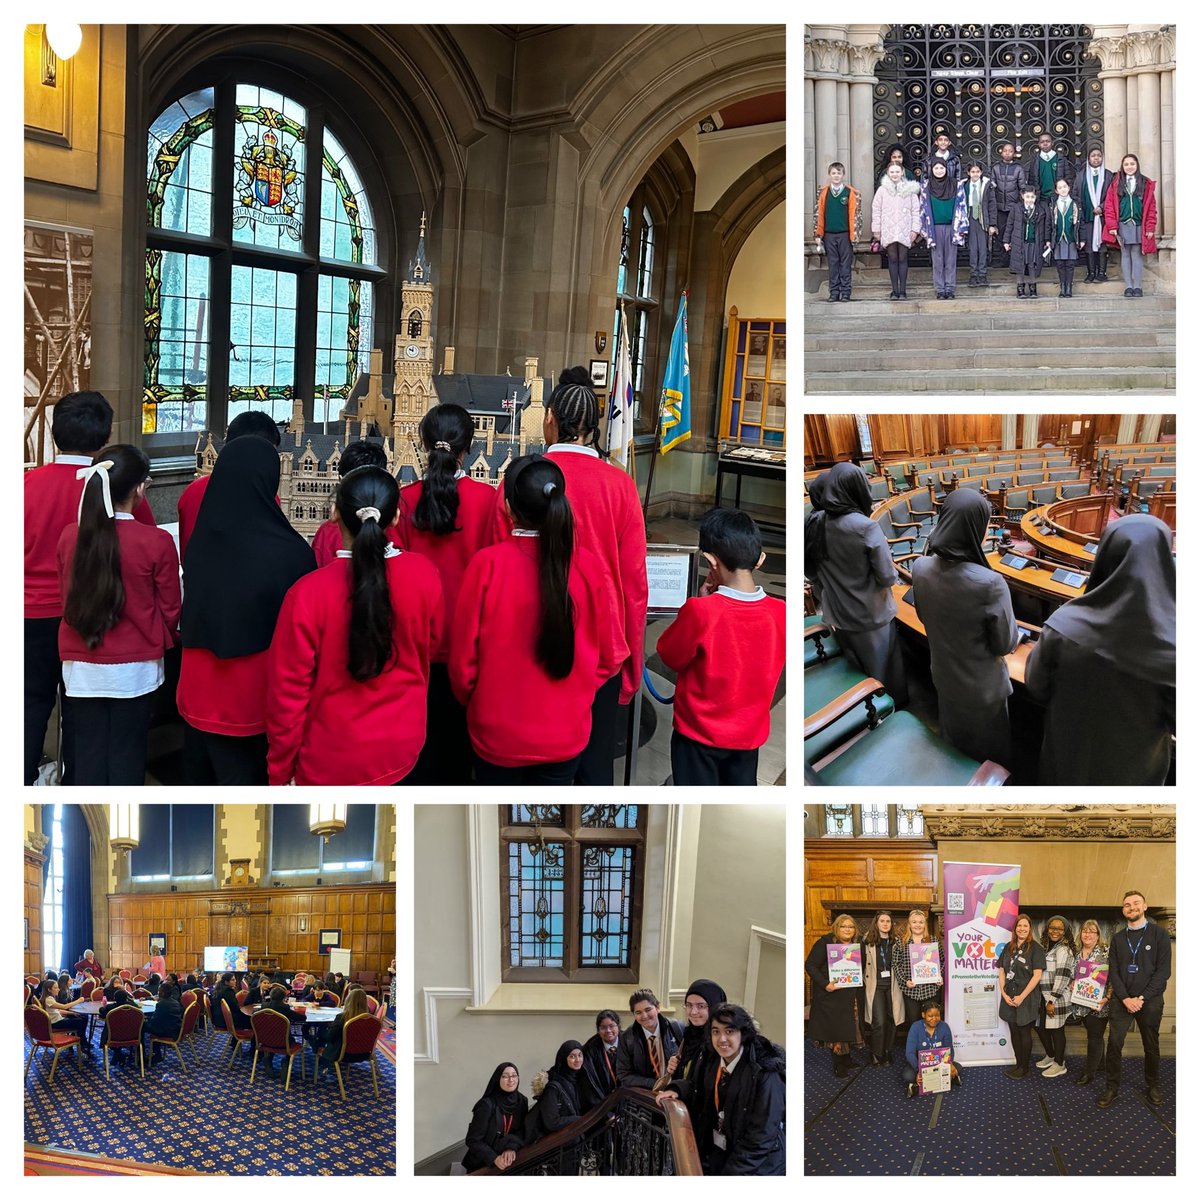 🗓️Over the last 2 weeks, more than 200 children & young people have visited our City Hall to learn about democracy & their rights🗓️

✅Two primary school visits
✅Two big @Linking_Network youth voice events
✅Today's SEND Future Leaders #promotethevote event

#voiceandinfluence